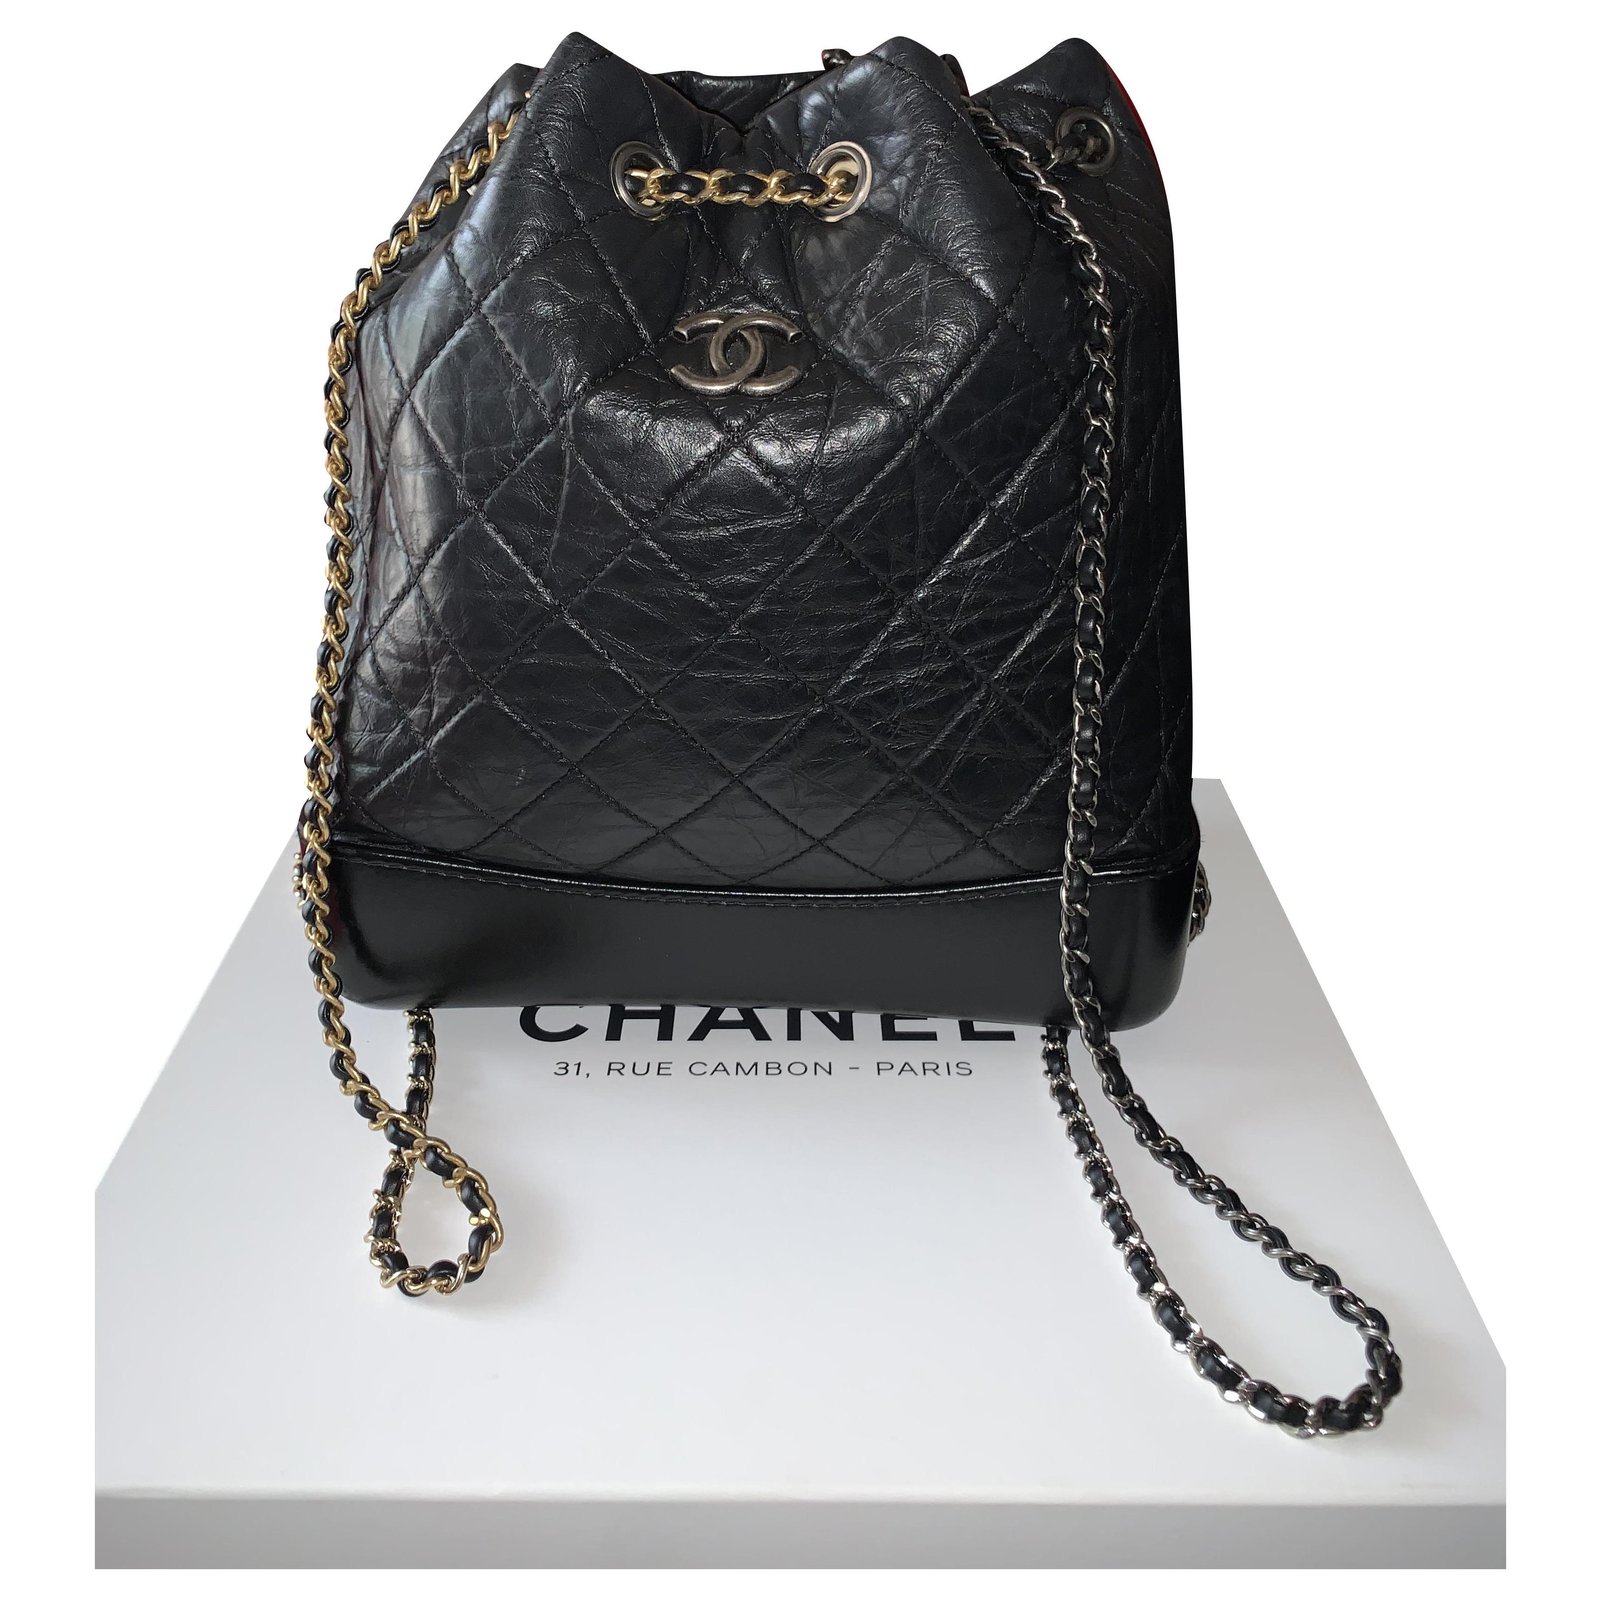 Chanel Gabrielle Small Backpack Black, Women's Fashion, Bags